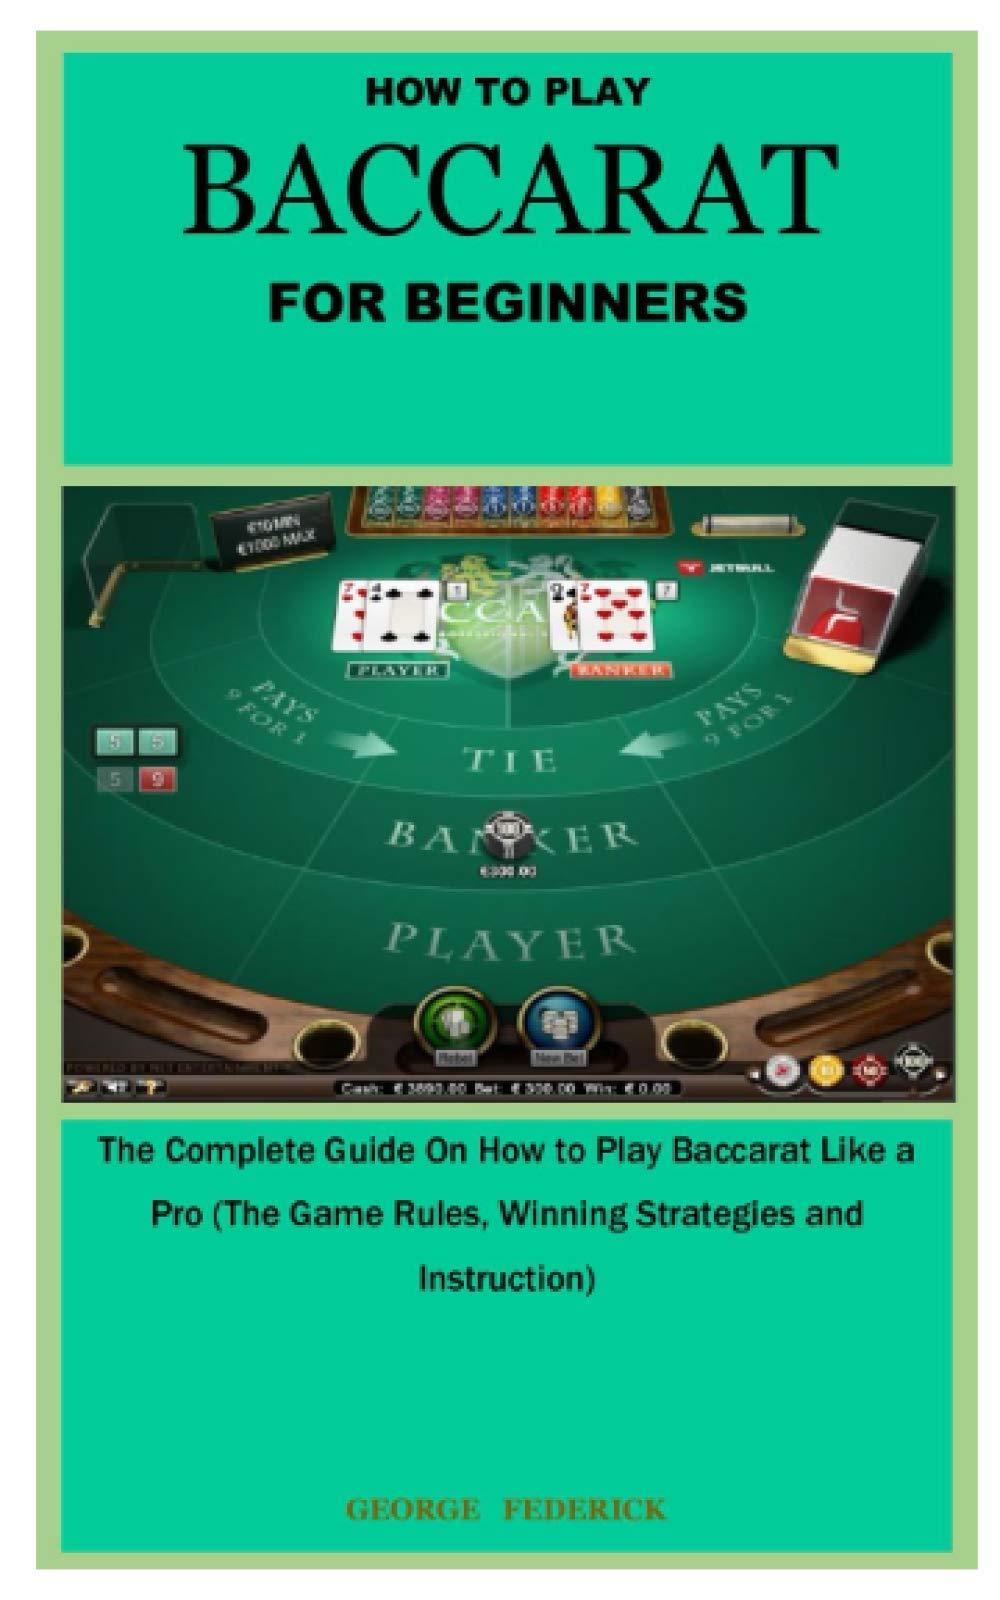 Ways to Play Baccarat Like a Professional 72647 1 - Ways to Play Baccarat Like a Professional